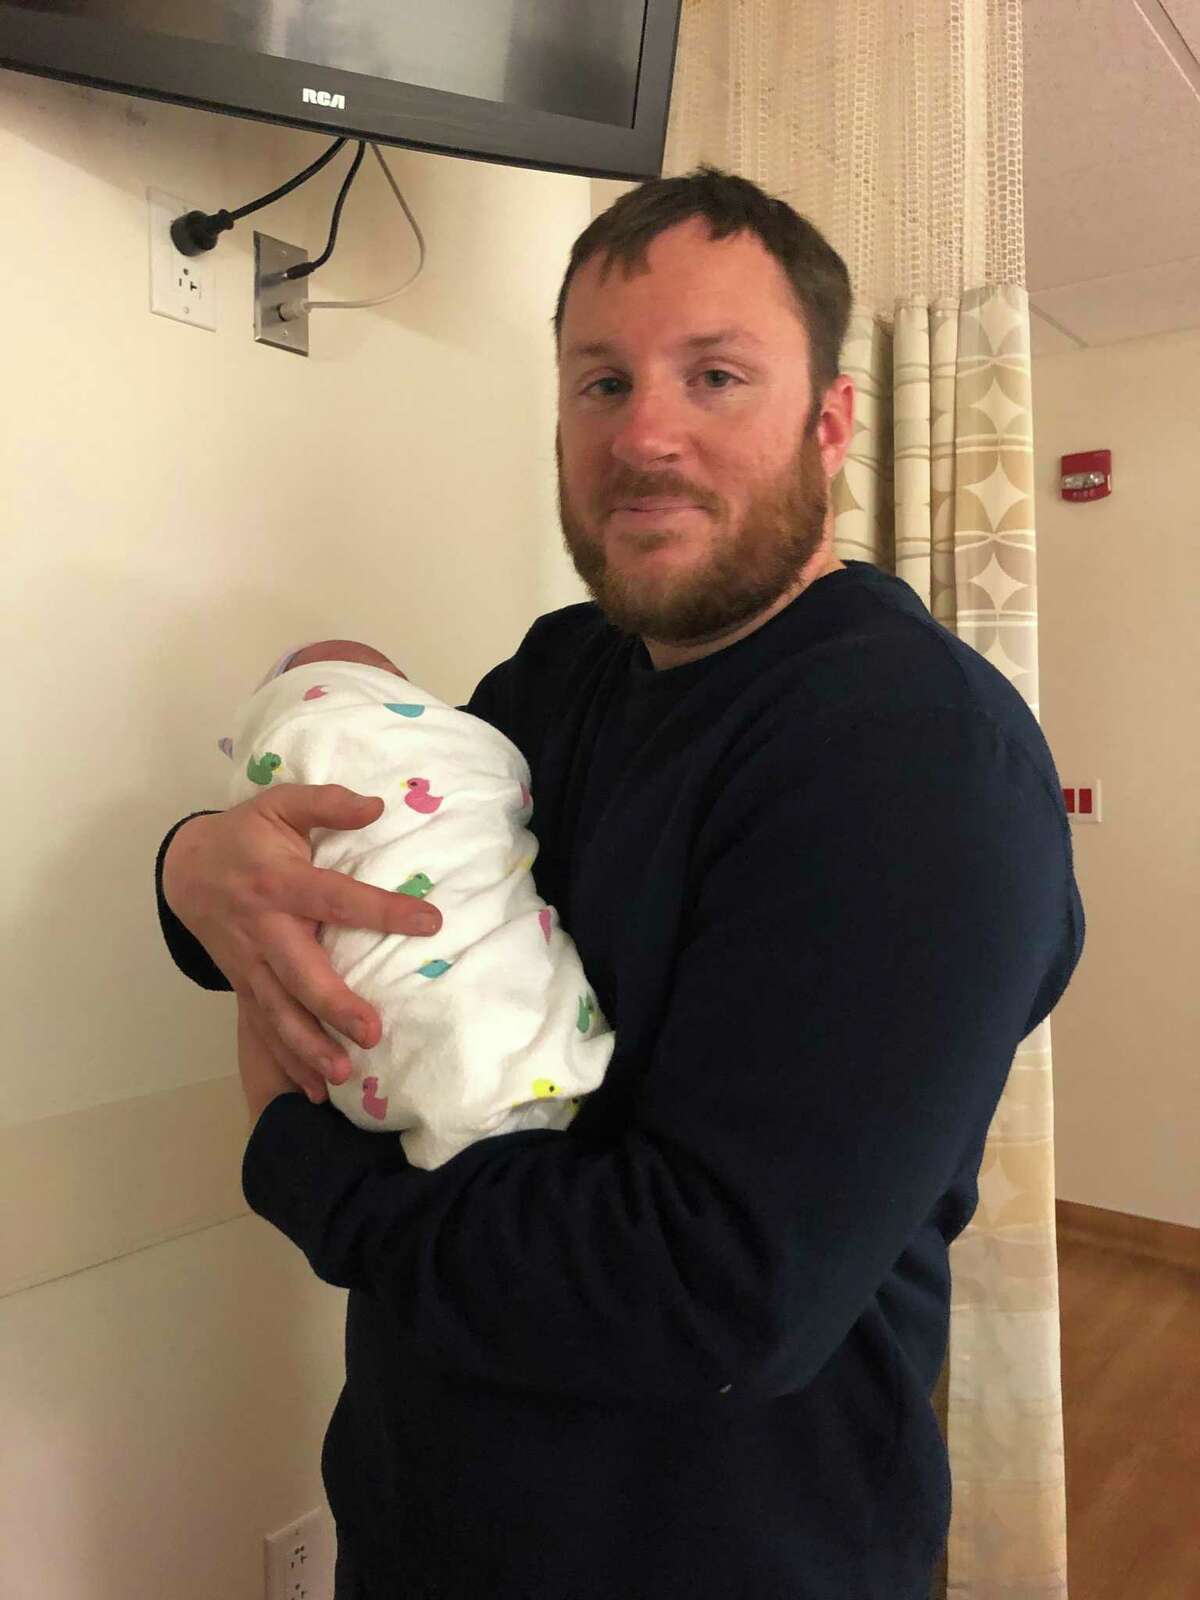 Frank Heisley is enamored by his new baby daughter. The Harris County Sheriff’s Office deputy navigated the treacherous roads to get his wife to the hospital in the nick of time for the delivery.